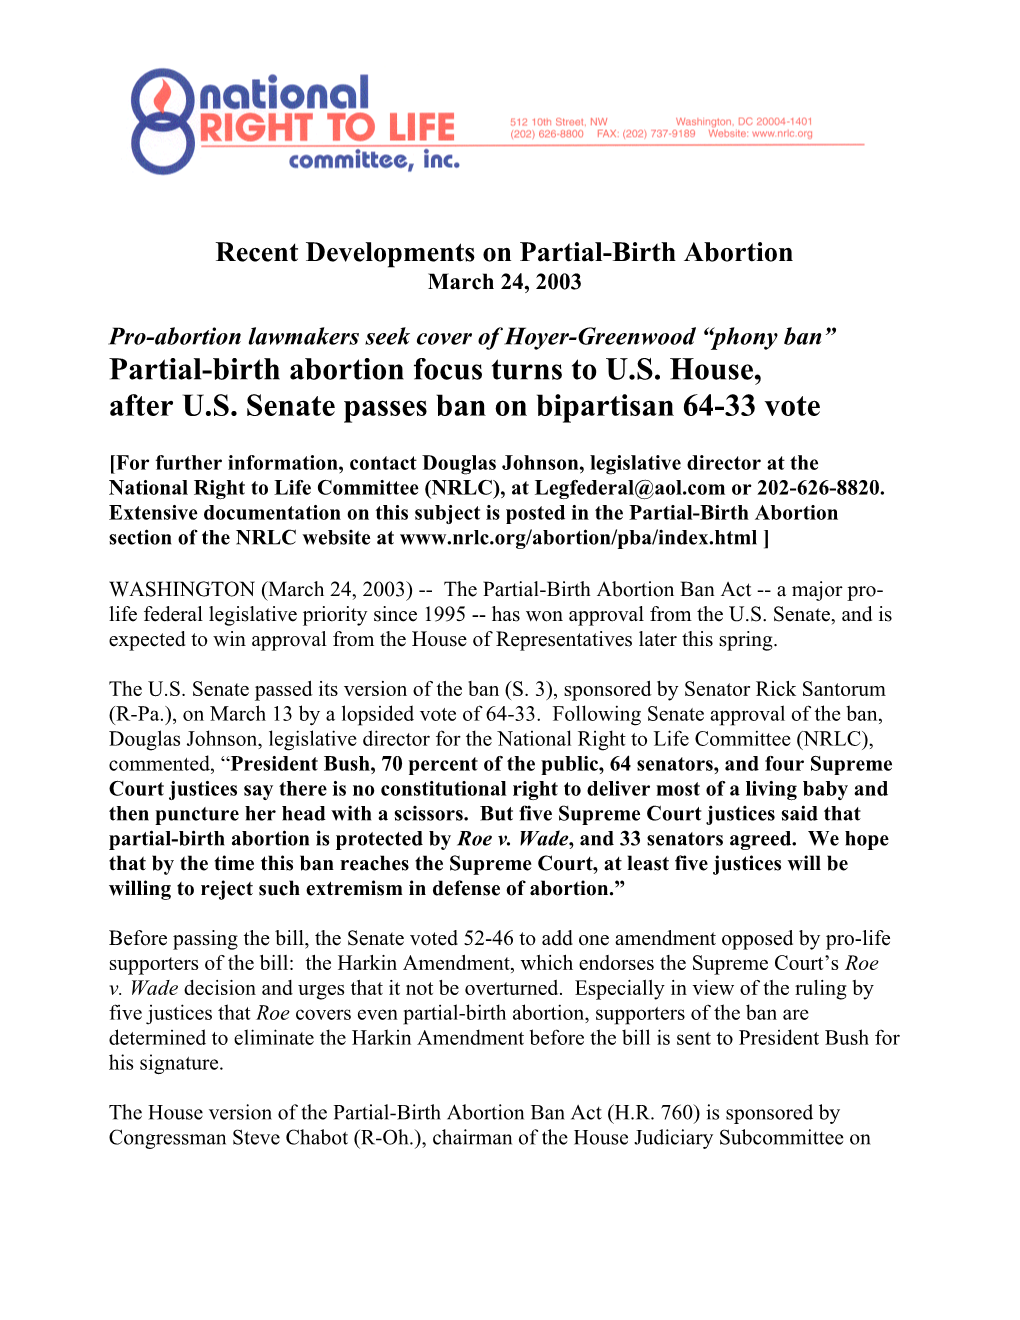 Pro-Abortion Lawmakers Seek Cover of Hoyer-Greenwood Phony Ban